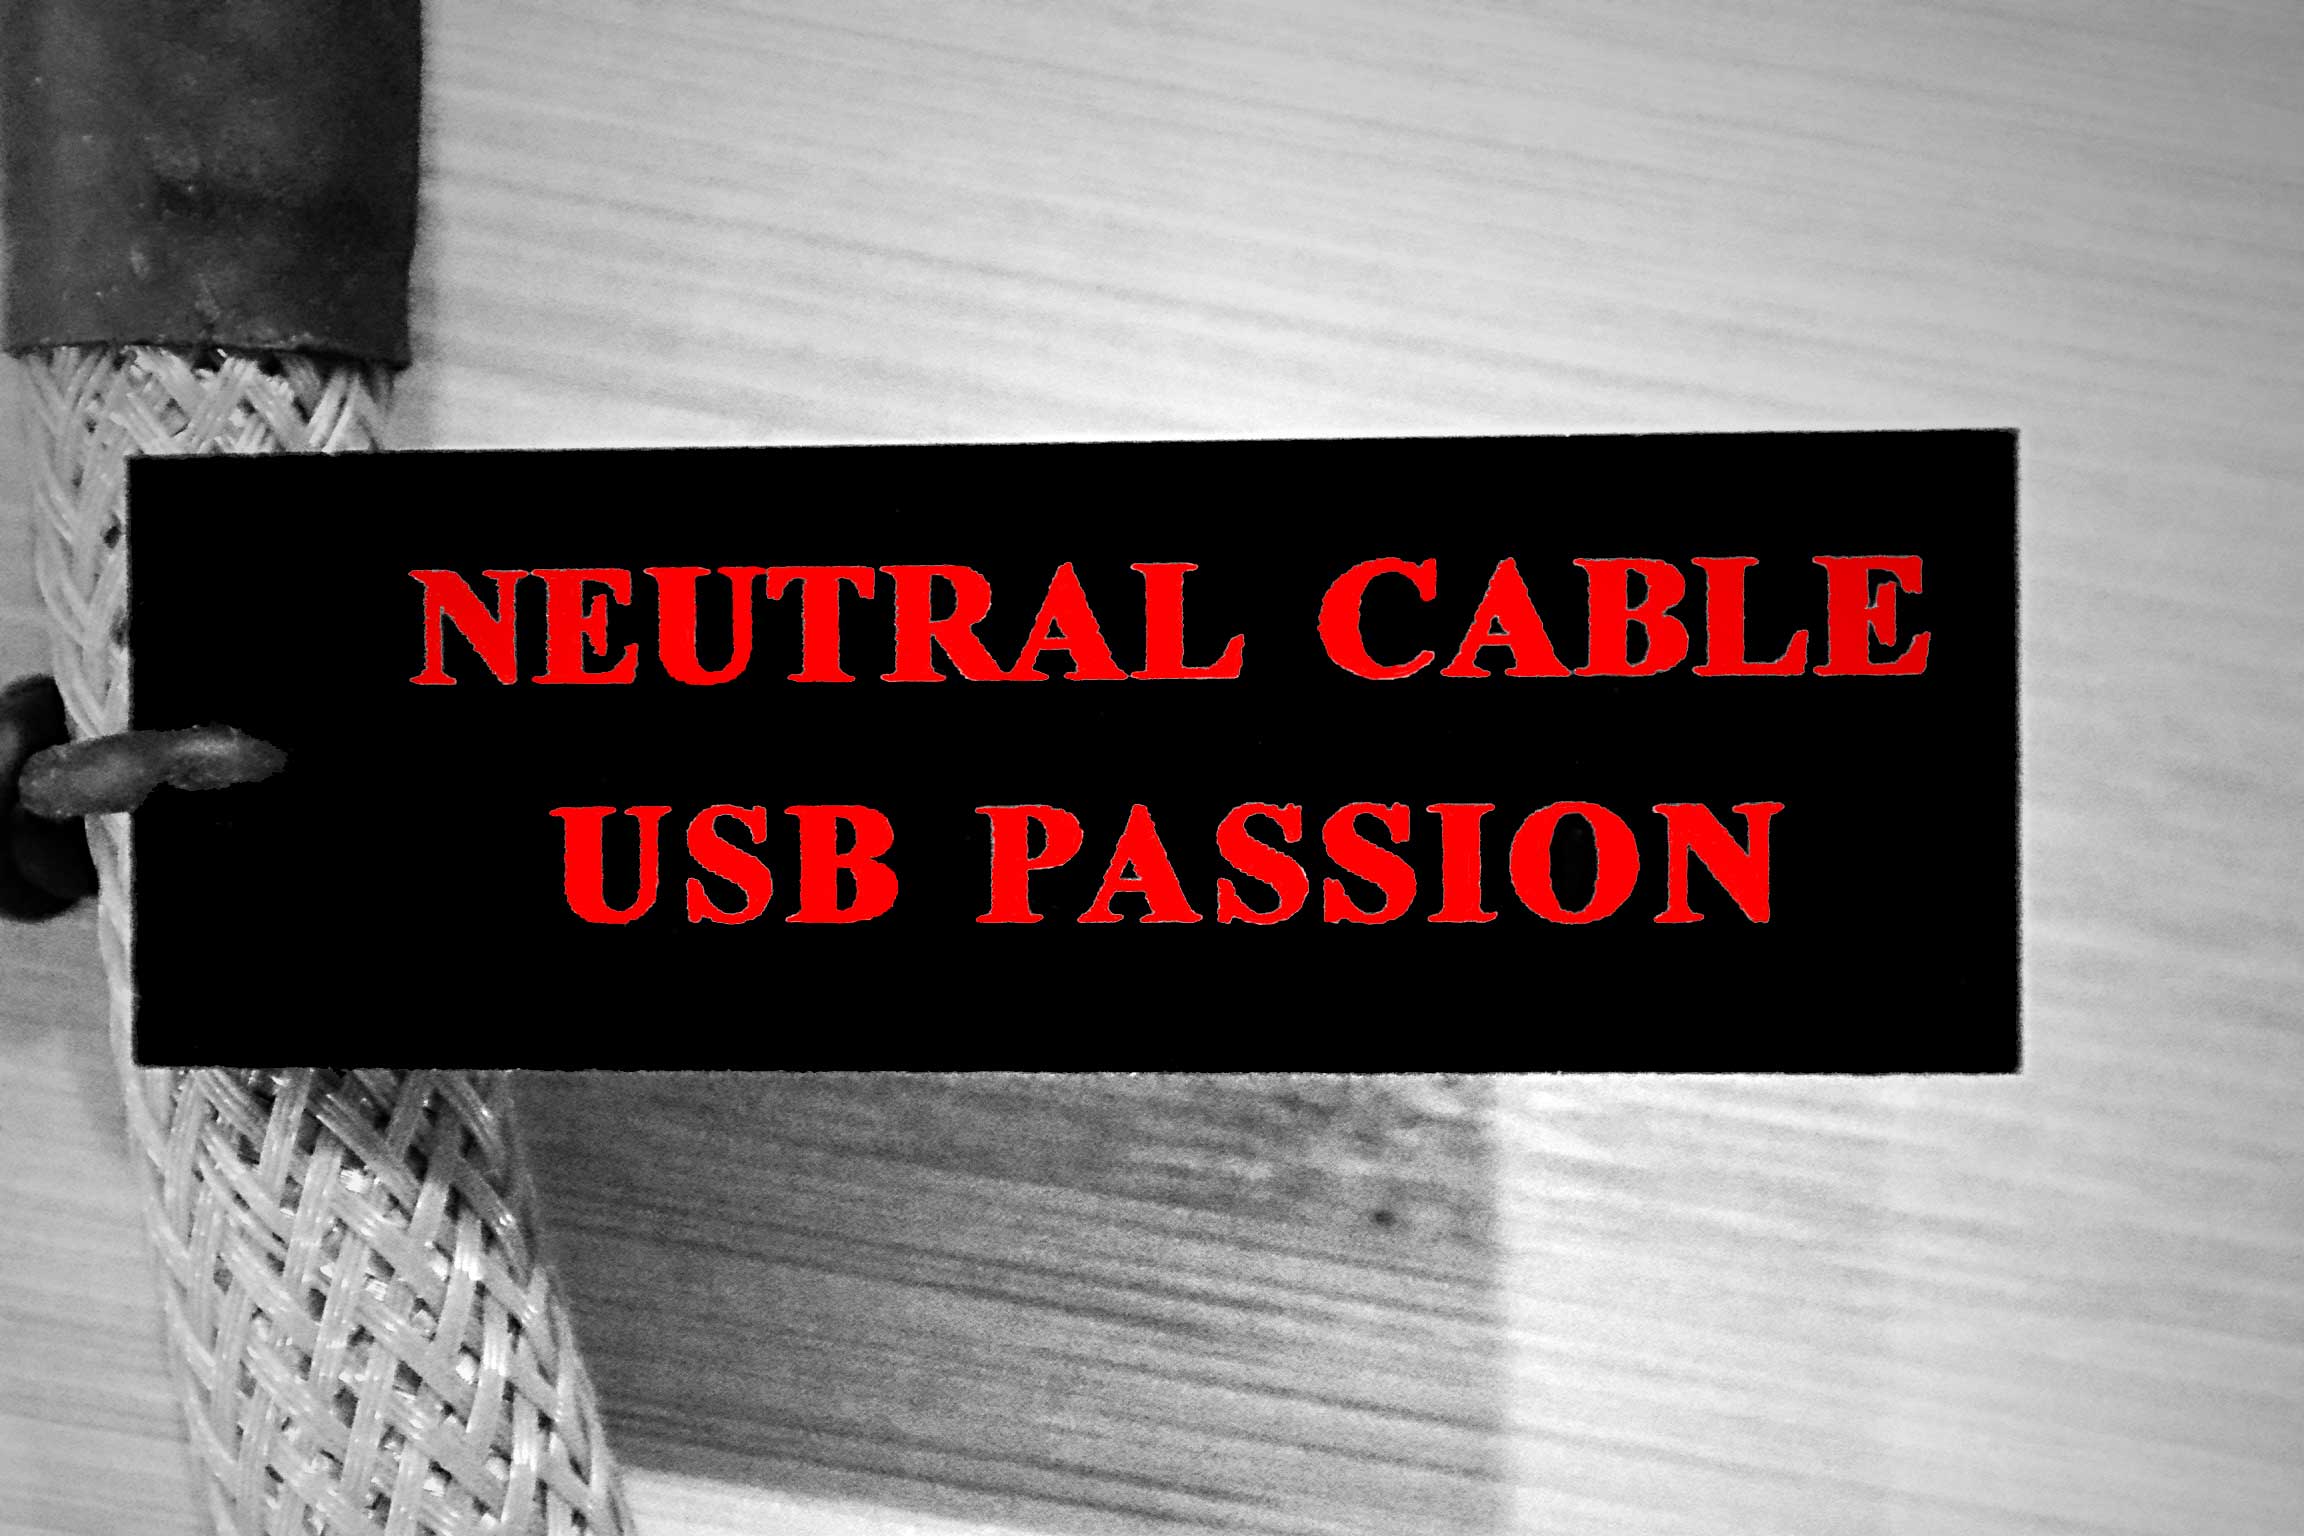 NEUTRAL CABLE USB PASSION